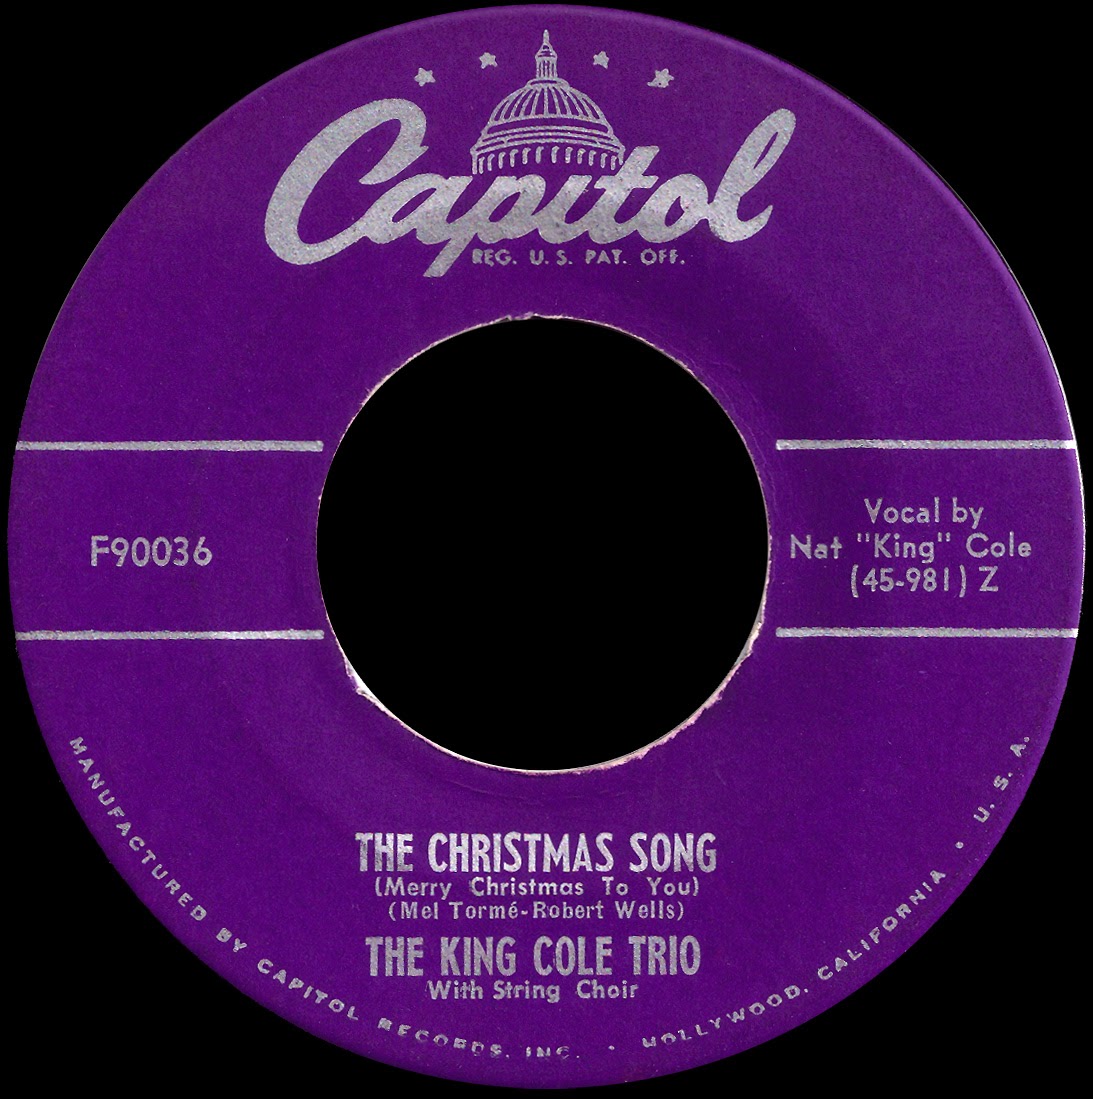 Now It's The Same Old Song: The Christmas Song